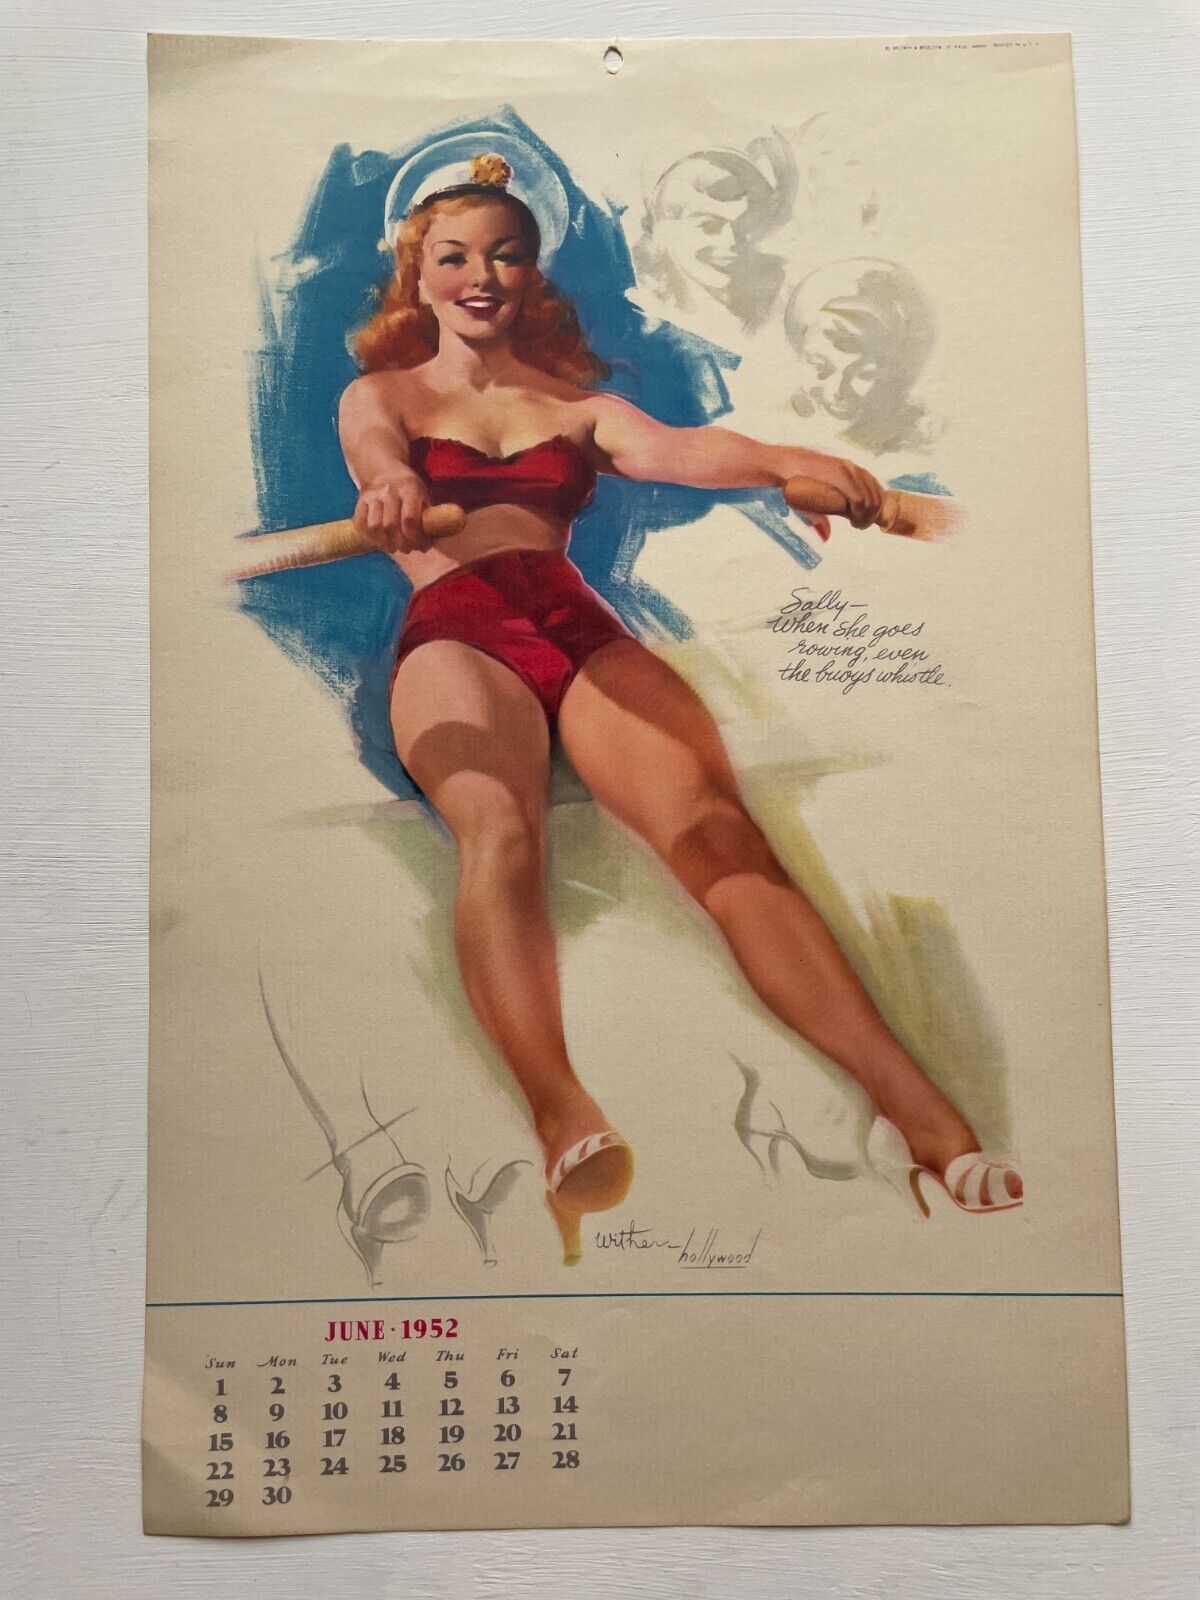 Vintage June 1952 Calendar Page w/ Pinup Girl Rowing A Boat by Withers